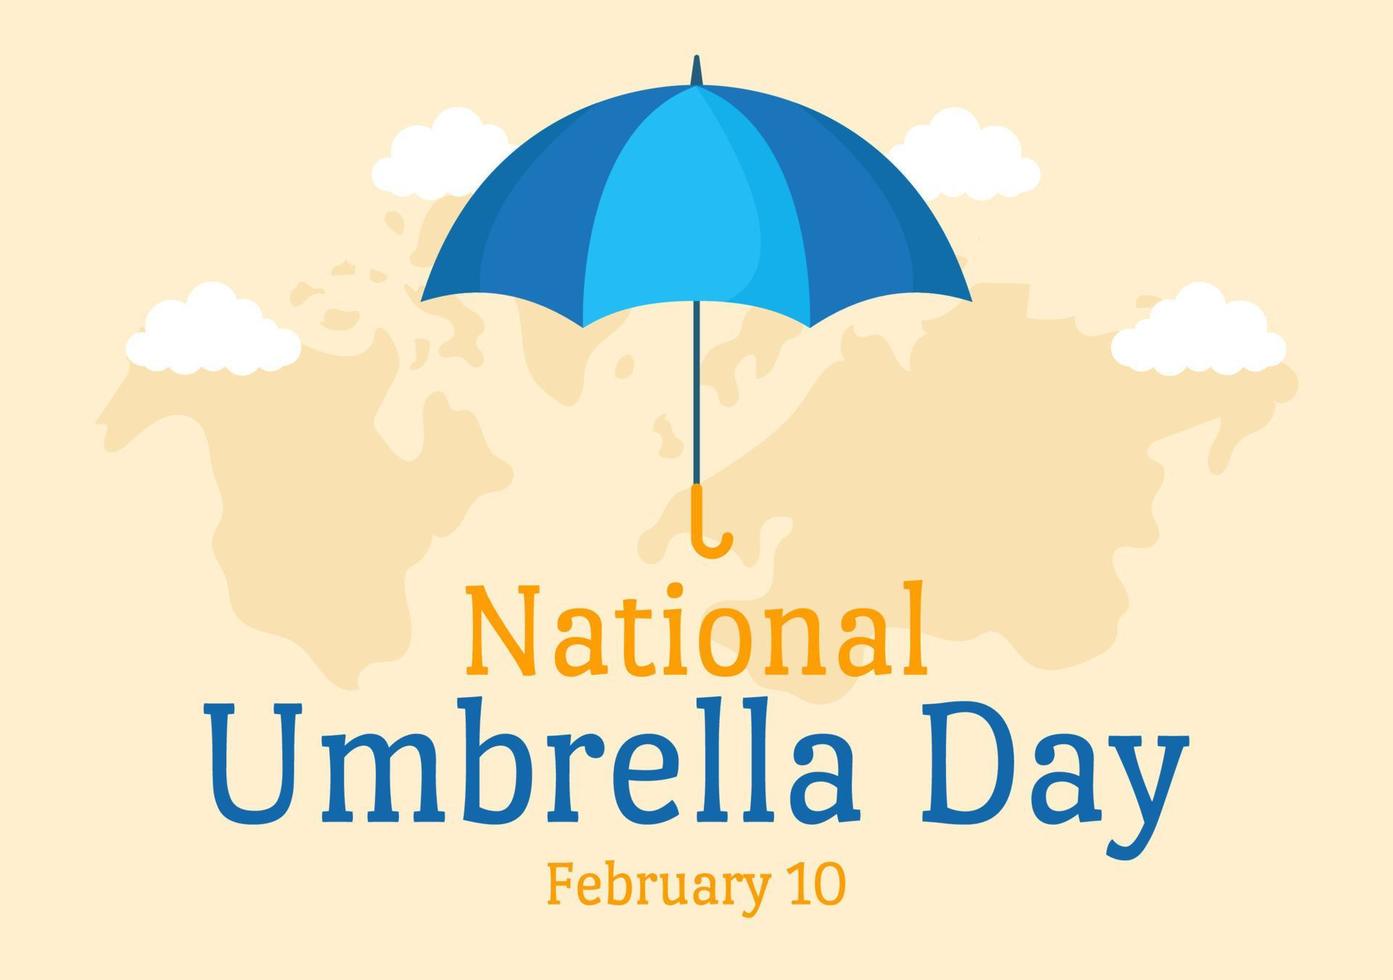 National Umbrella Day Celebration on February 10th to Protect us from Rain and Sun in Flat Cartoon Hand Drawn Template Illustration vector